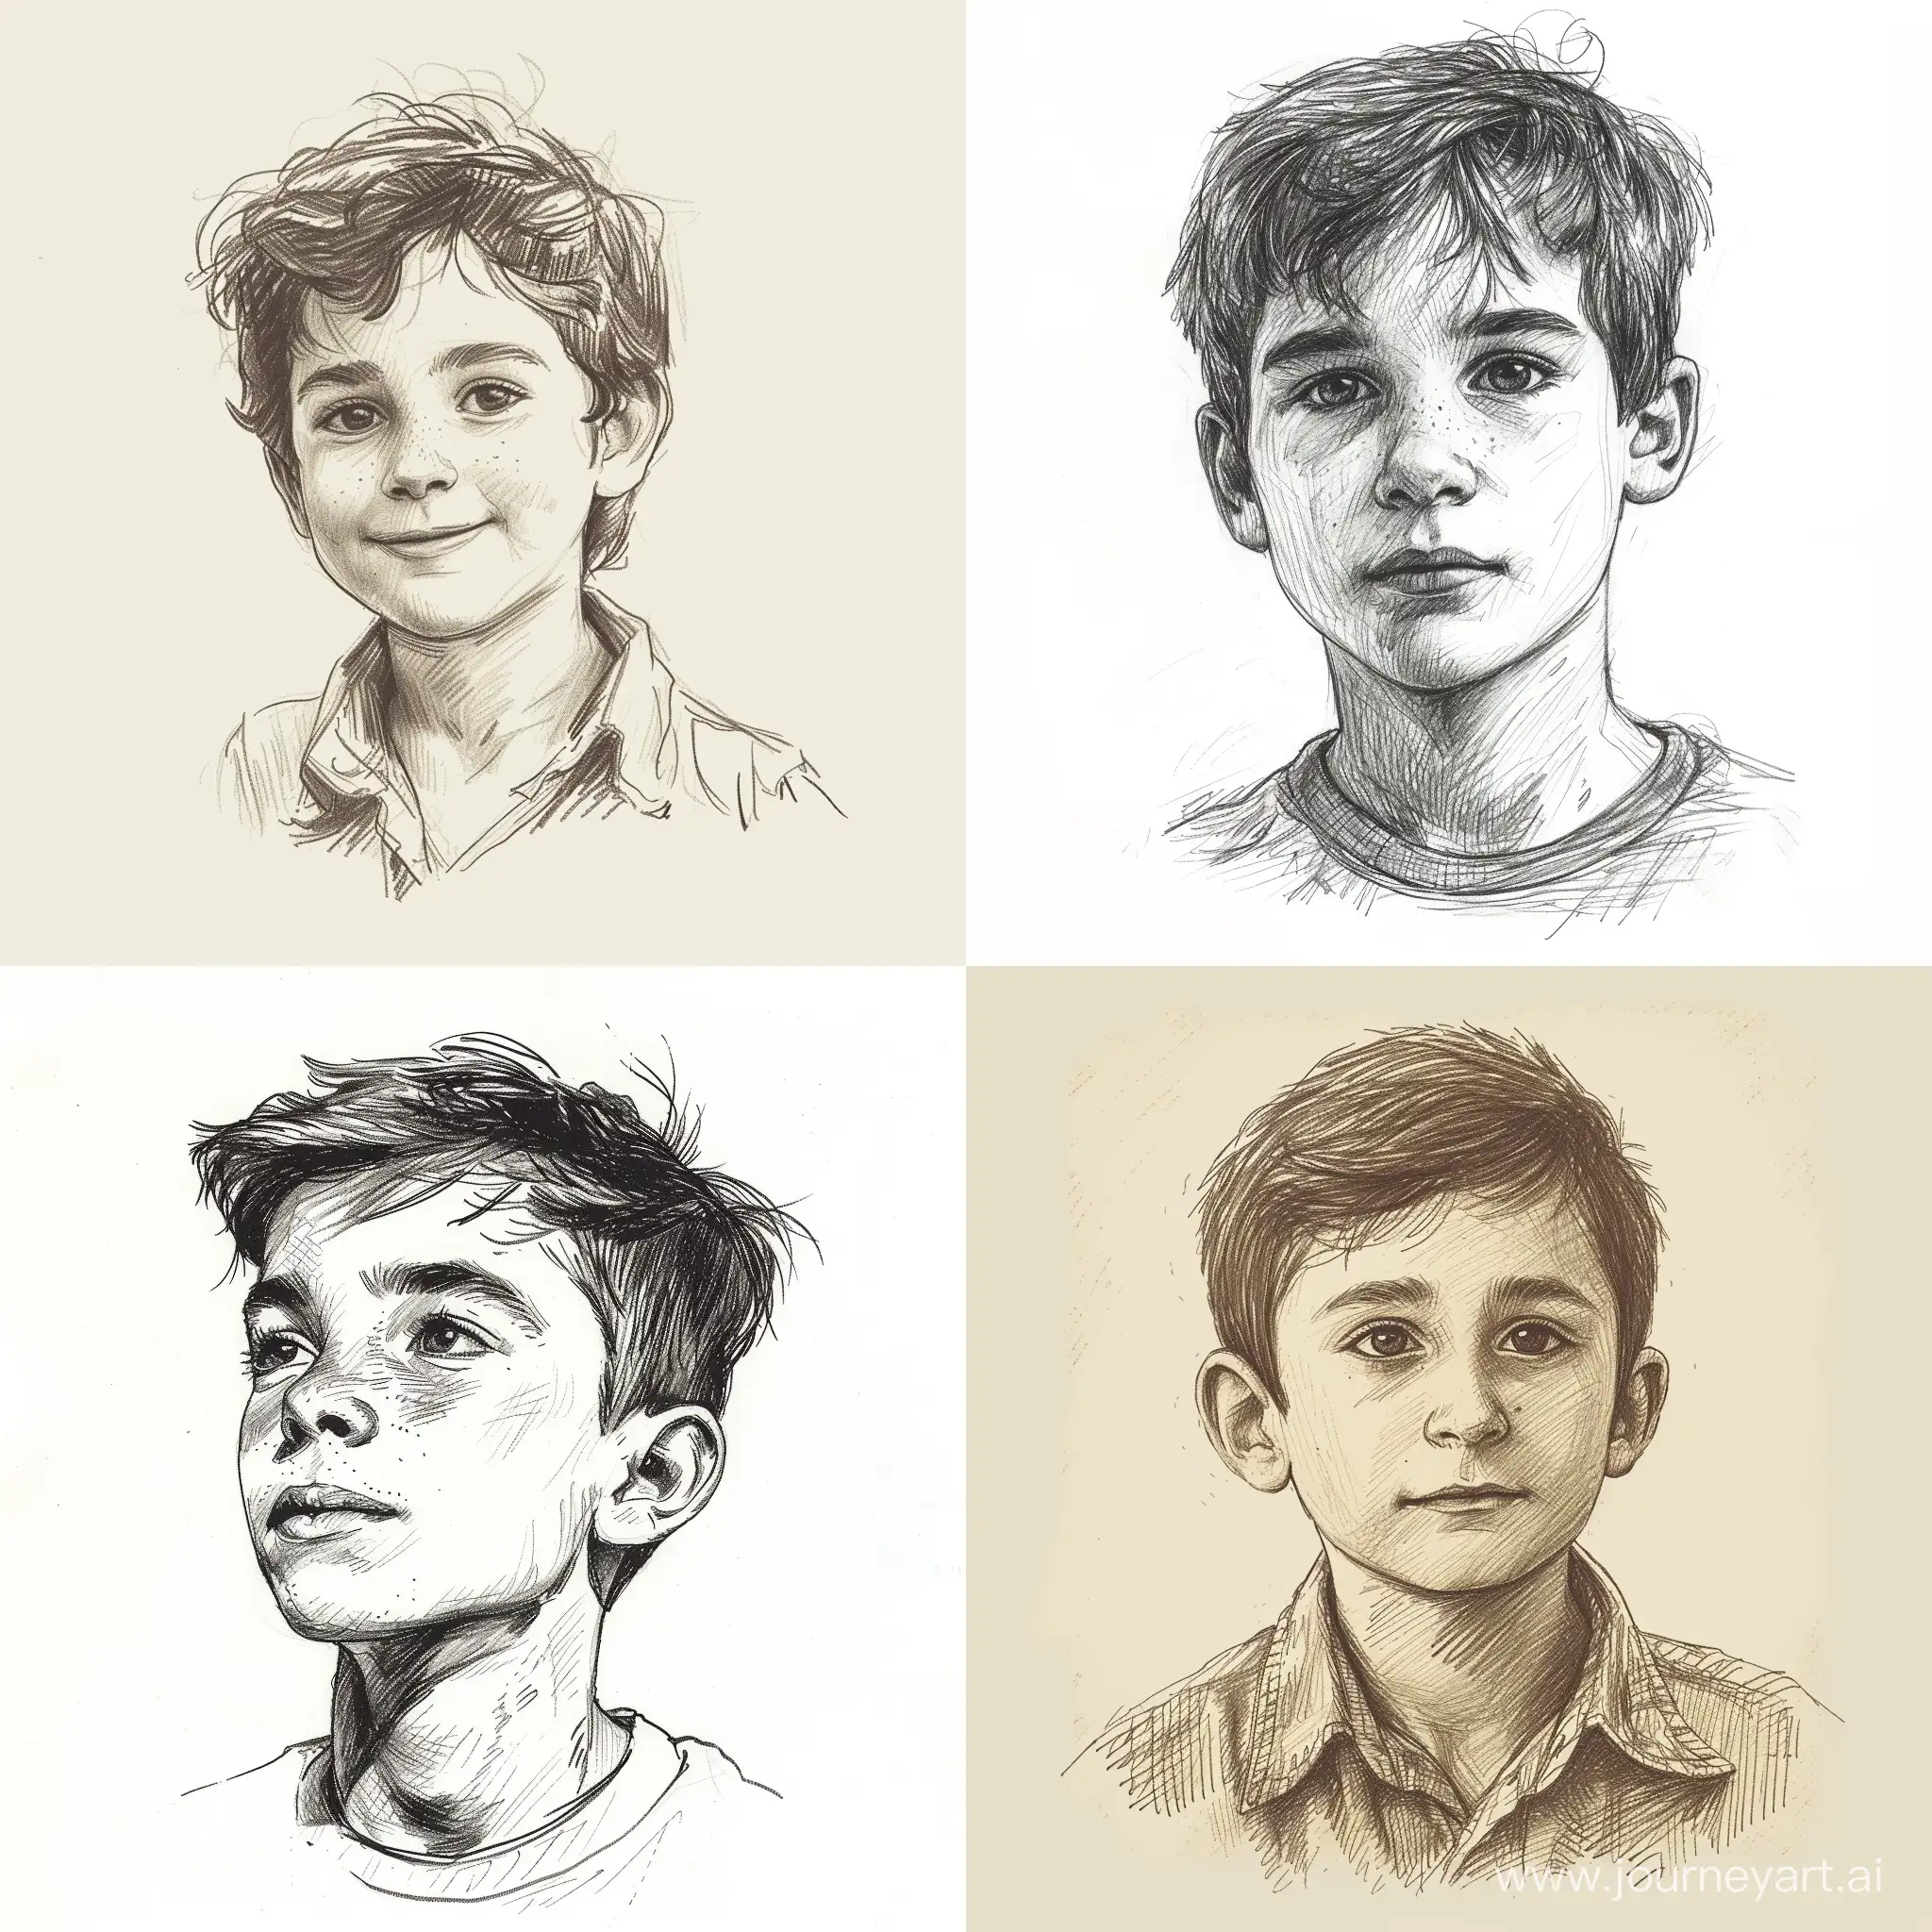 Charming-HandDrawn-Portrait-of-a-Boy-with-Expressive-Features